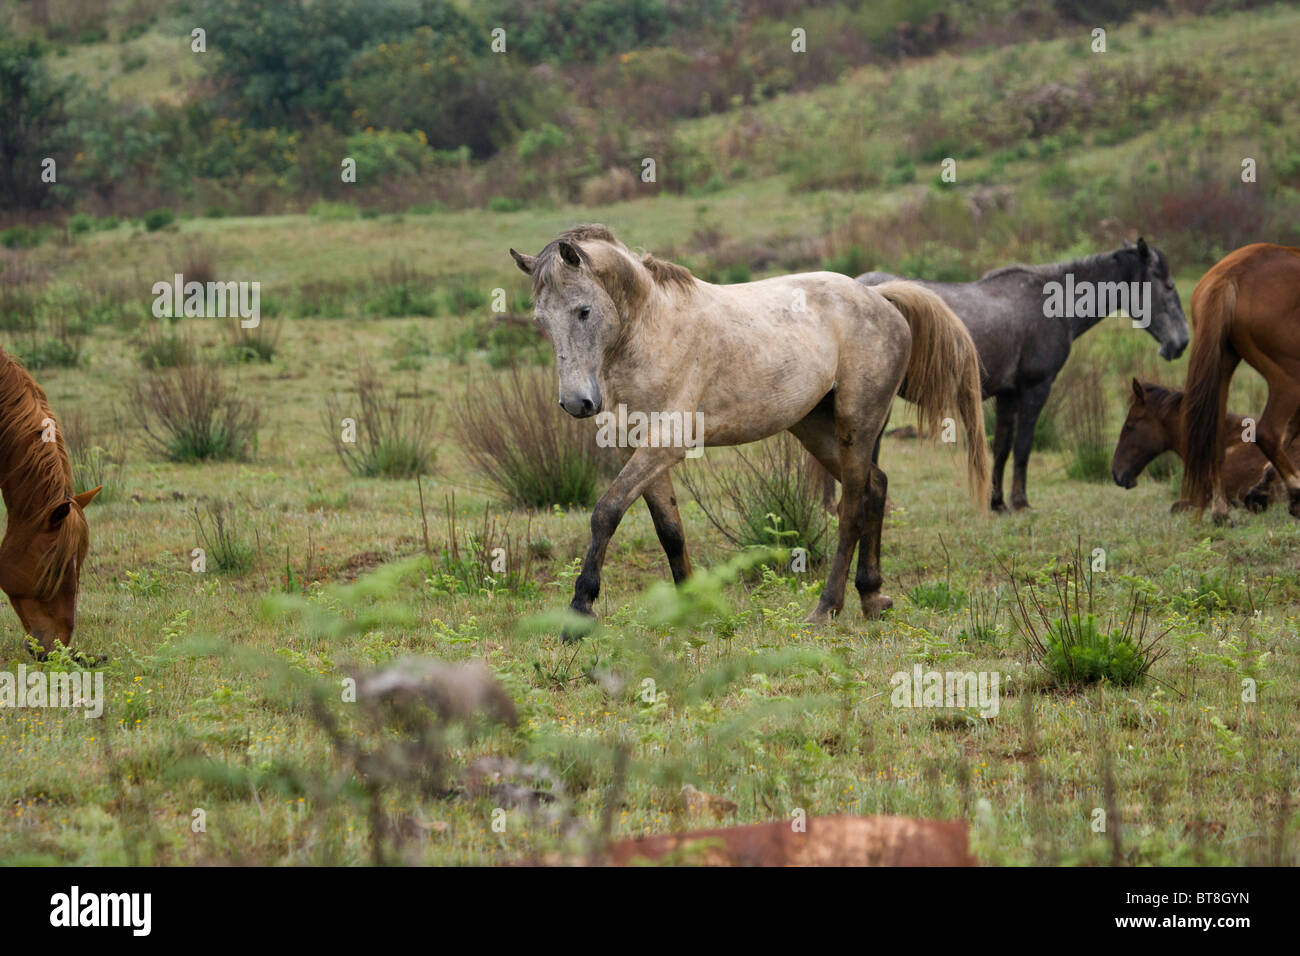 South Africa Wild Feral Animal Horse Nature Stock Photo